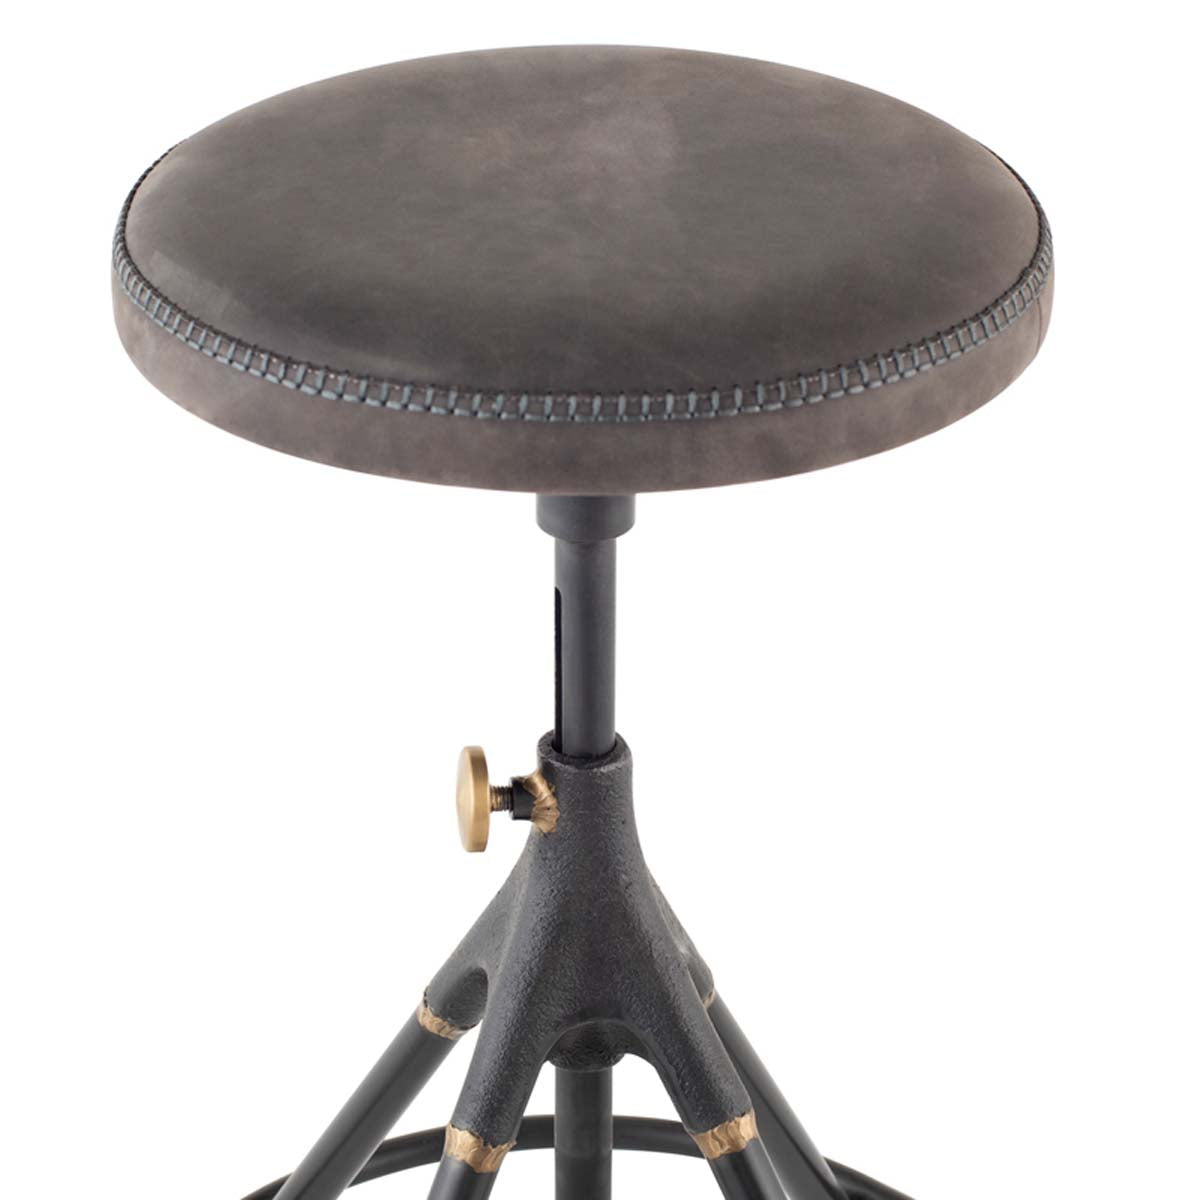 District Eight Akron Counter Stool - Storm Black